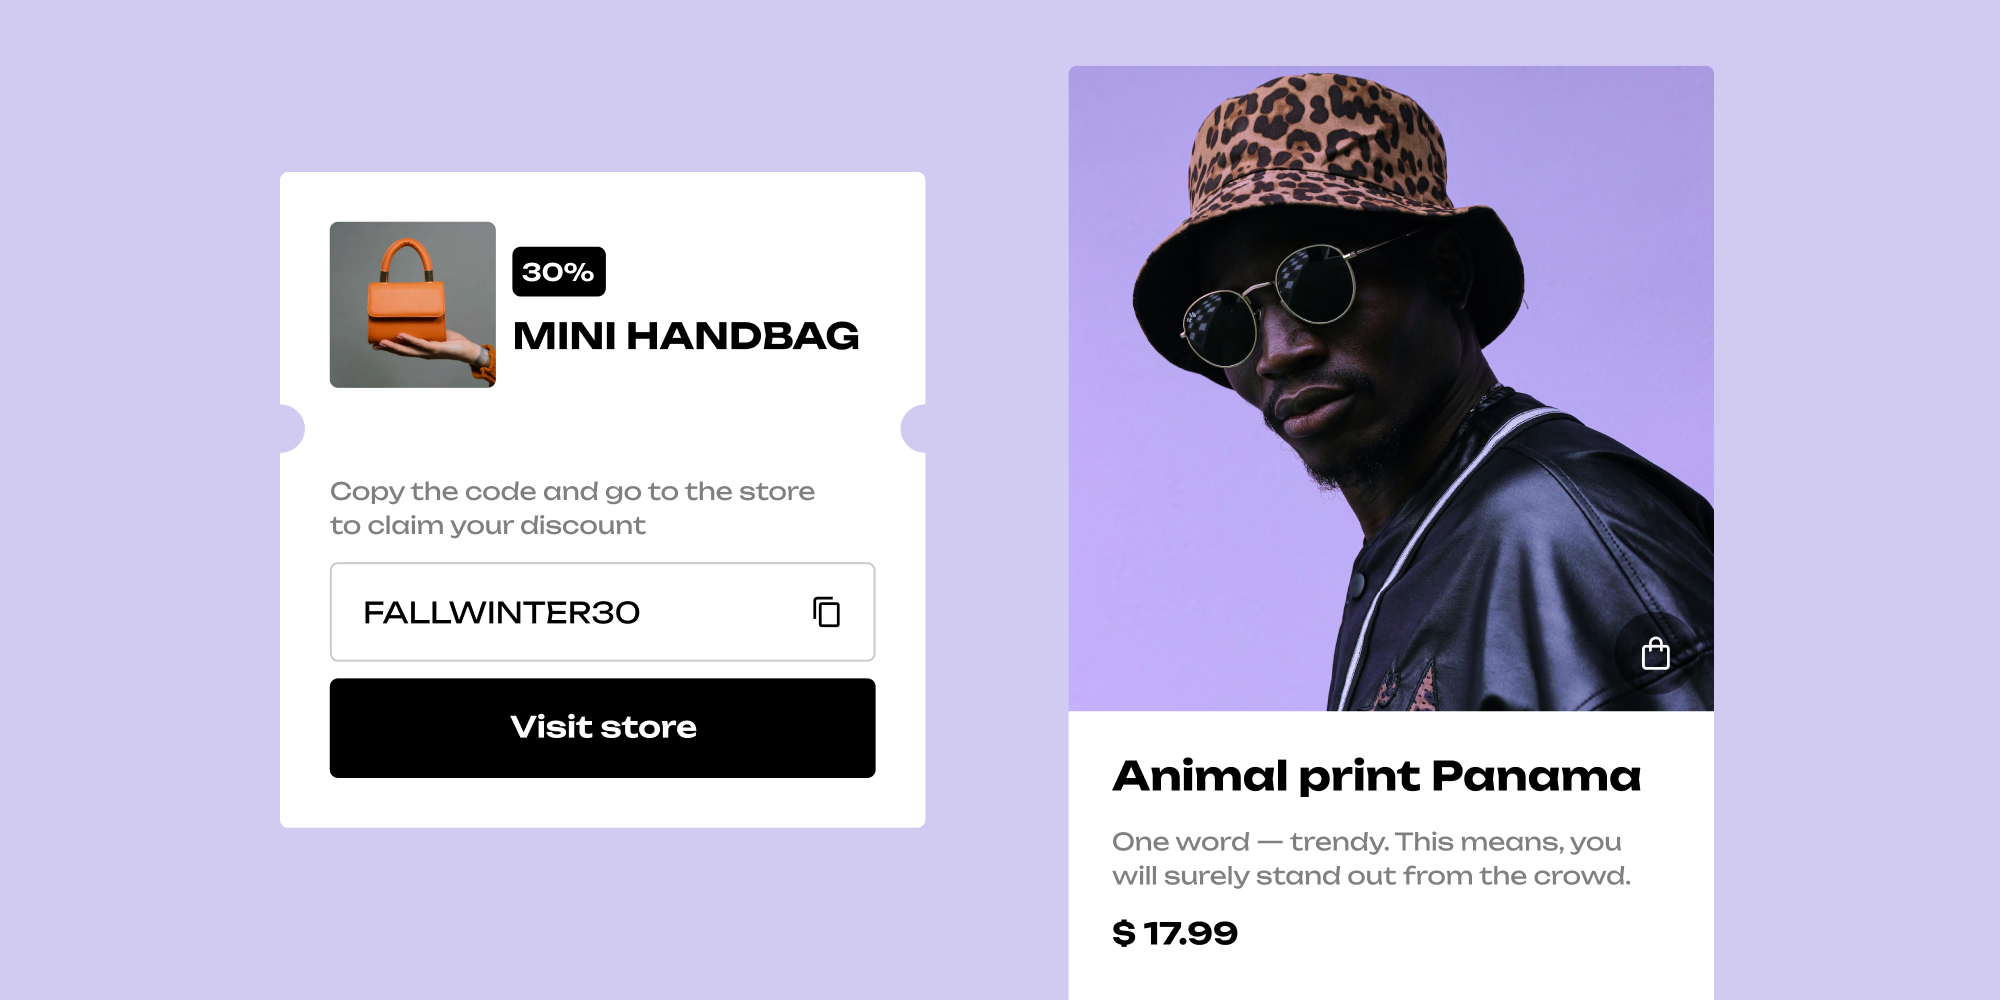 How to Set Up an Instagram Shop to Drive Sales in 6 Steps